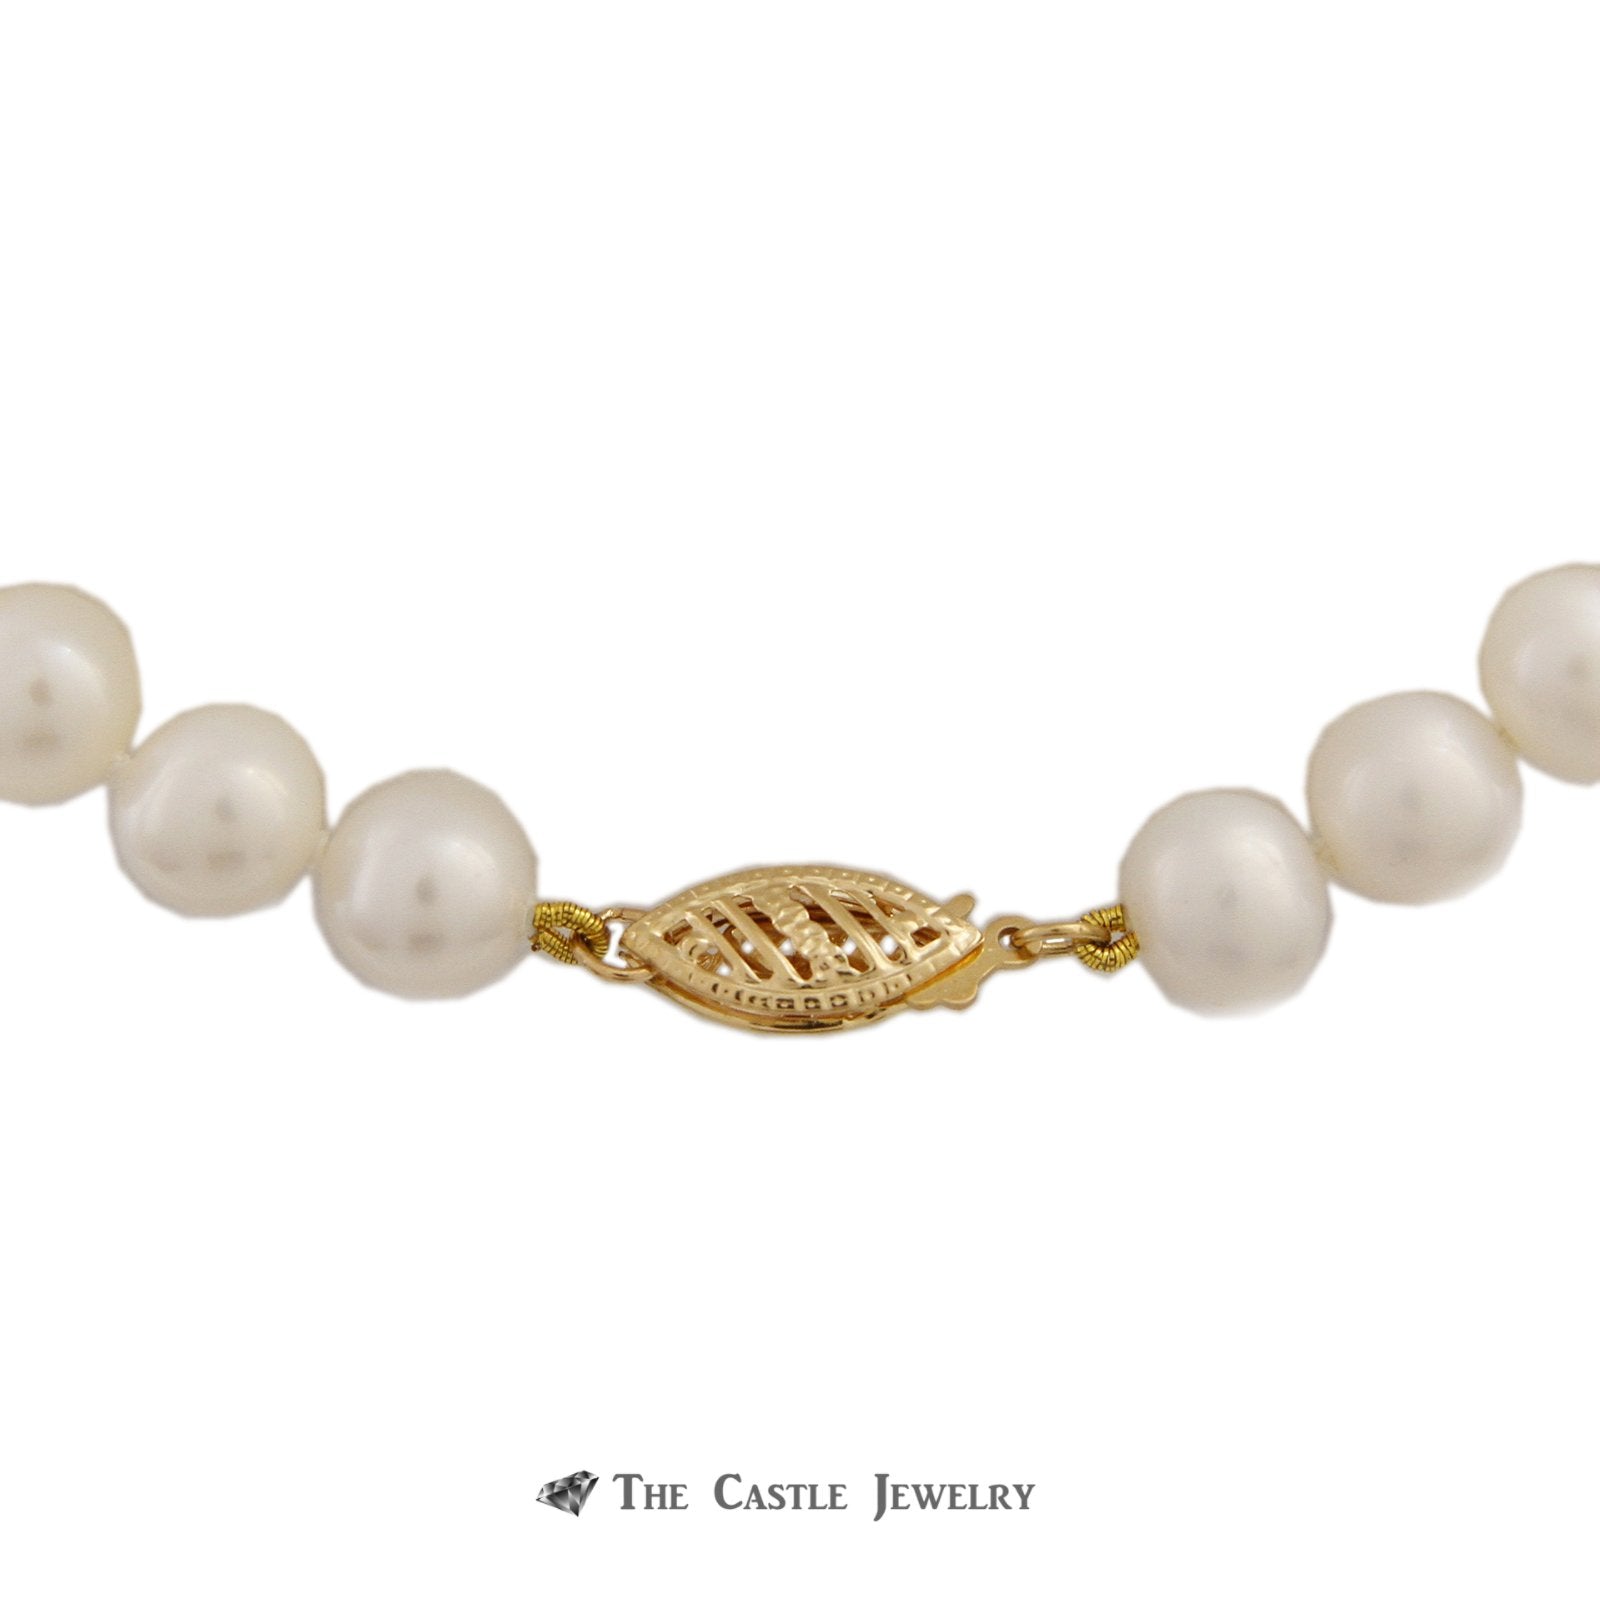 Pearl Chain Necklace in Yellow Gold – Goldmakers Fine Jewelry